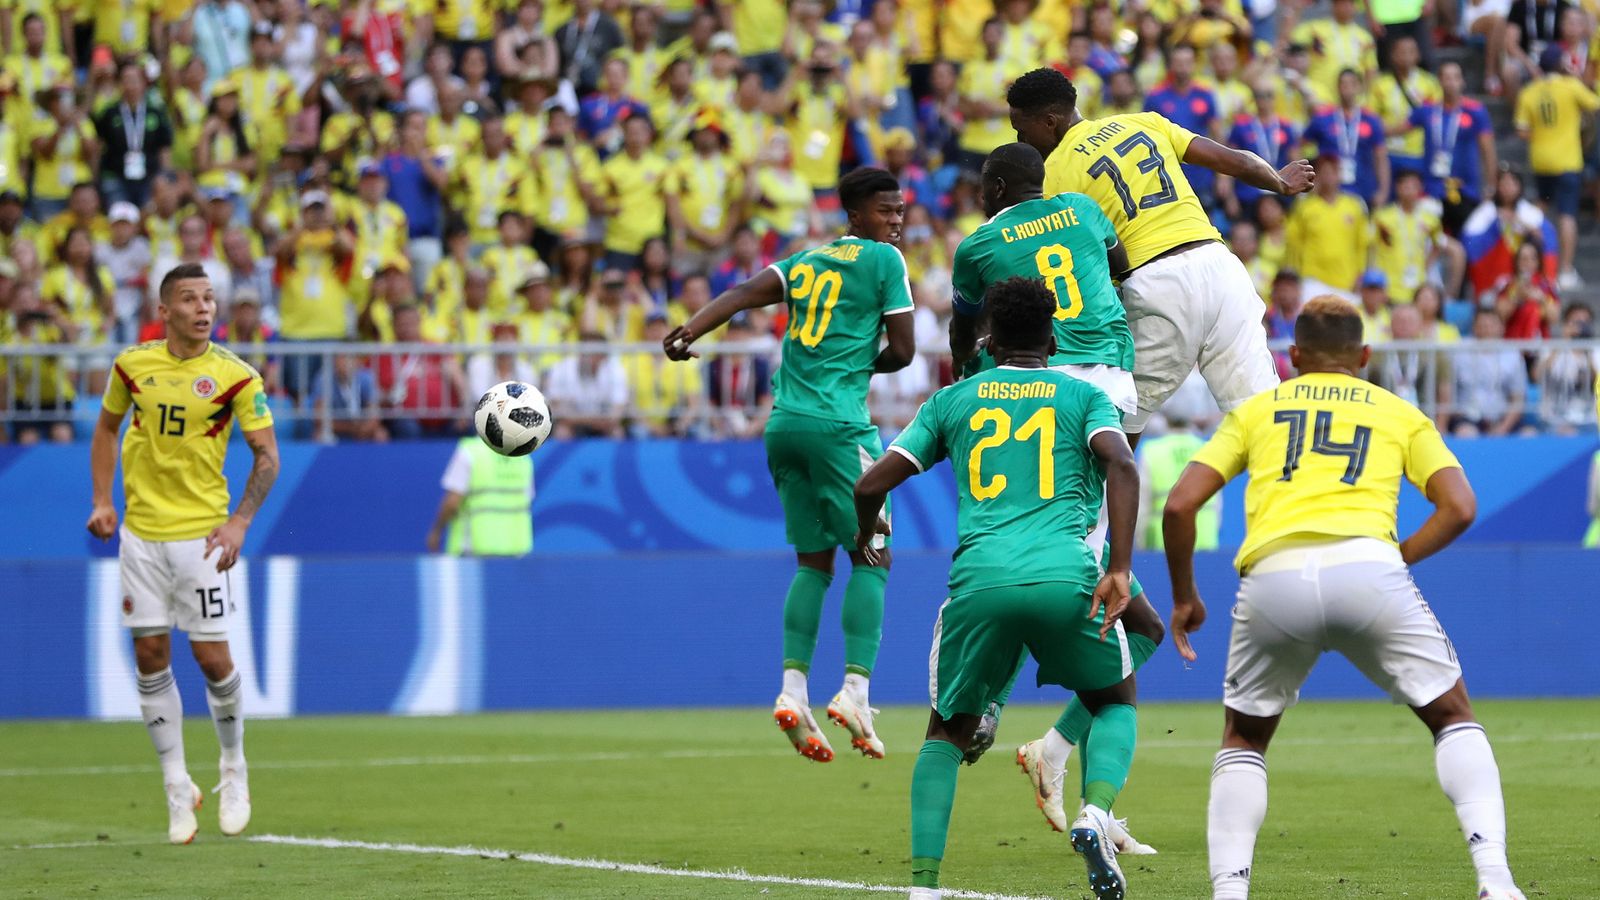 Senegal 0 - 1 Colombia - Match Report & Highlights